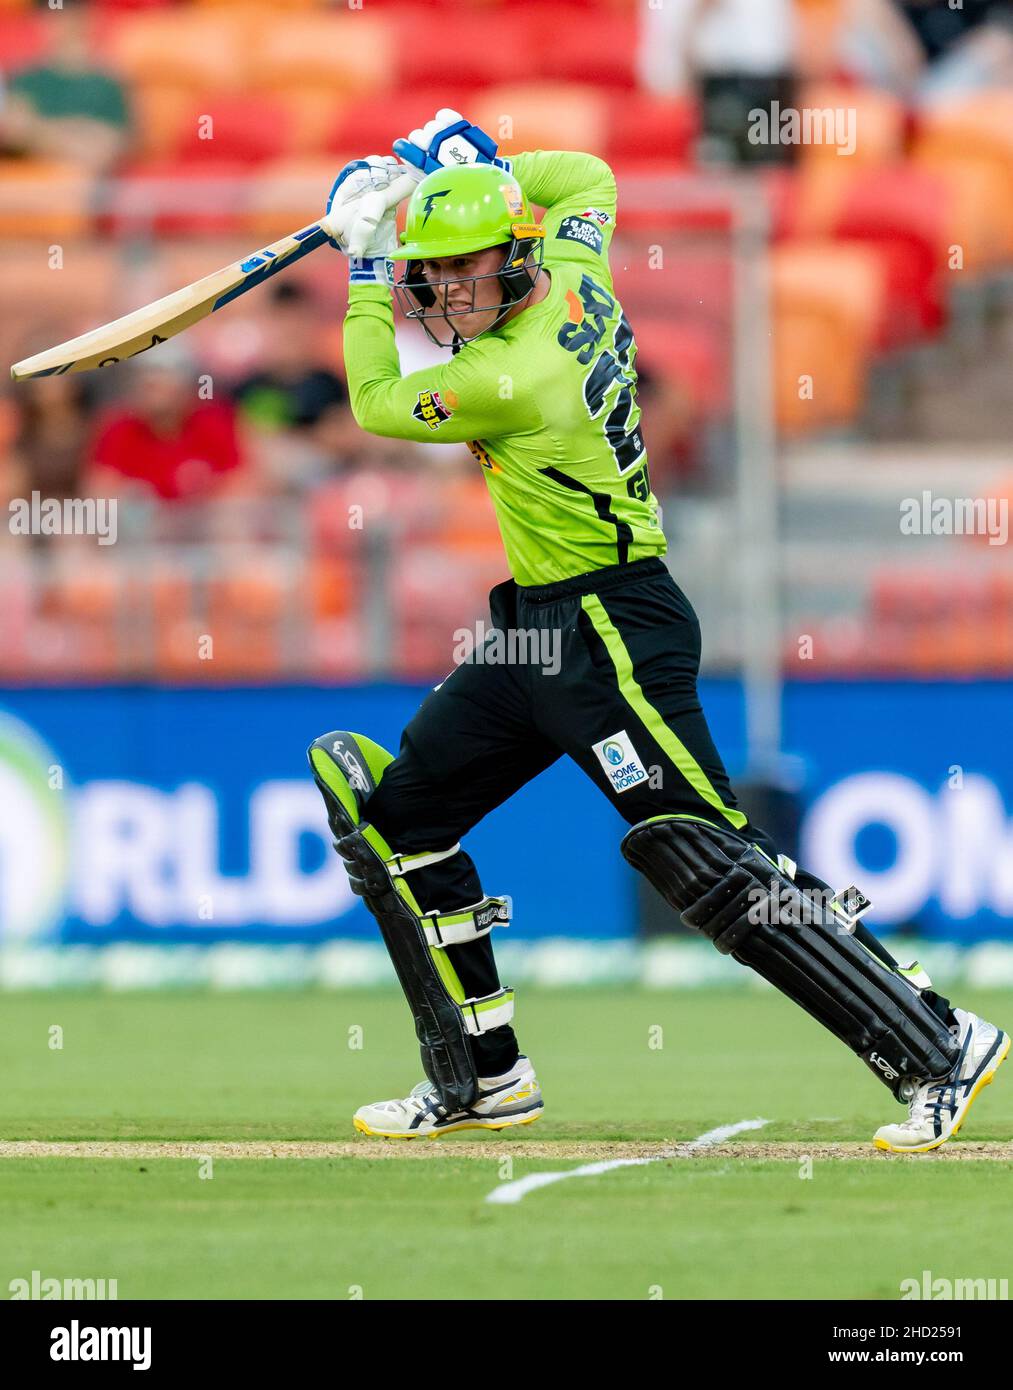 Sydney, Australia. 02nd Jan, 2022. Matthew Gilkes of Thunder bats during the match between Sydney Thunder and Adelaide Strikers at Sydney Showground Stadium, on January 02, 2022, in Sydney, Australia. (Editorial use only) Credit: Izhar Ahmed Khan/Alamy Live News/Alamy Live News Stock Photo